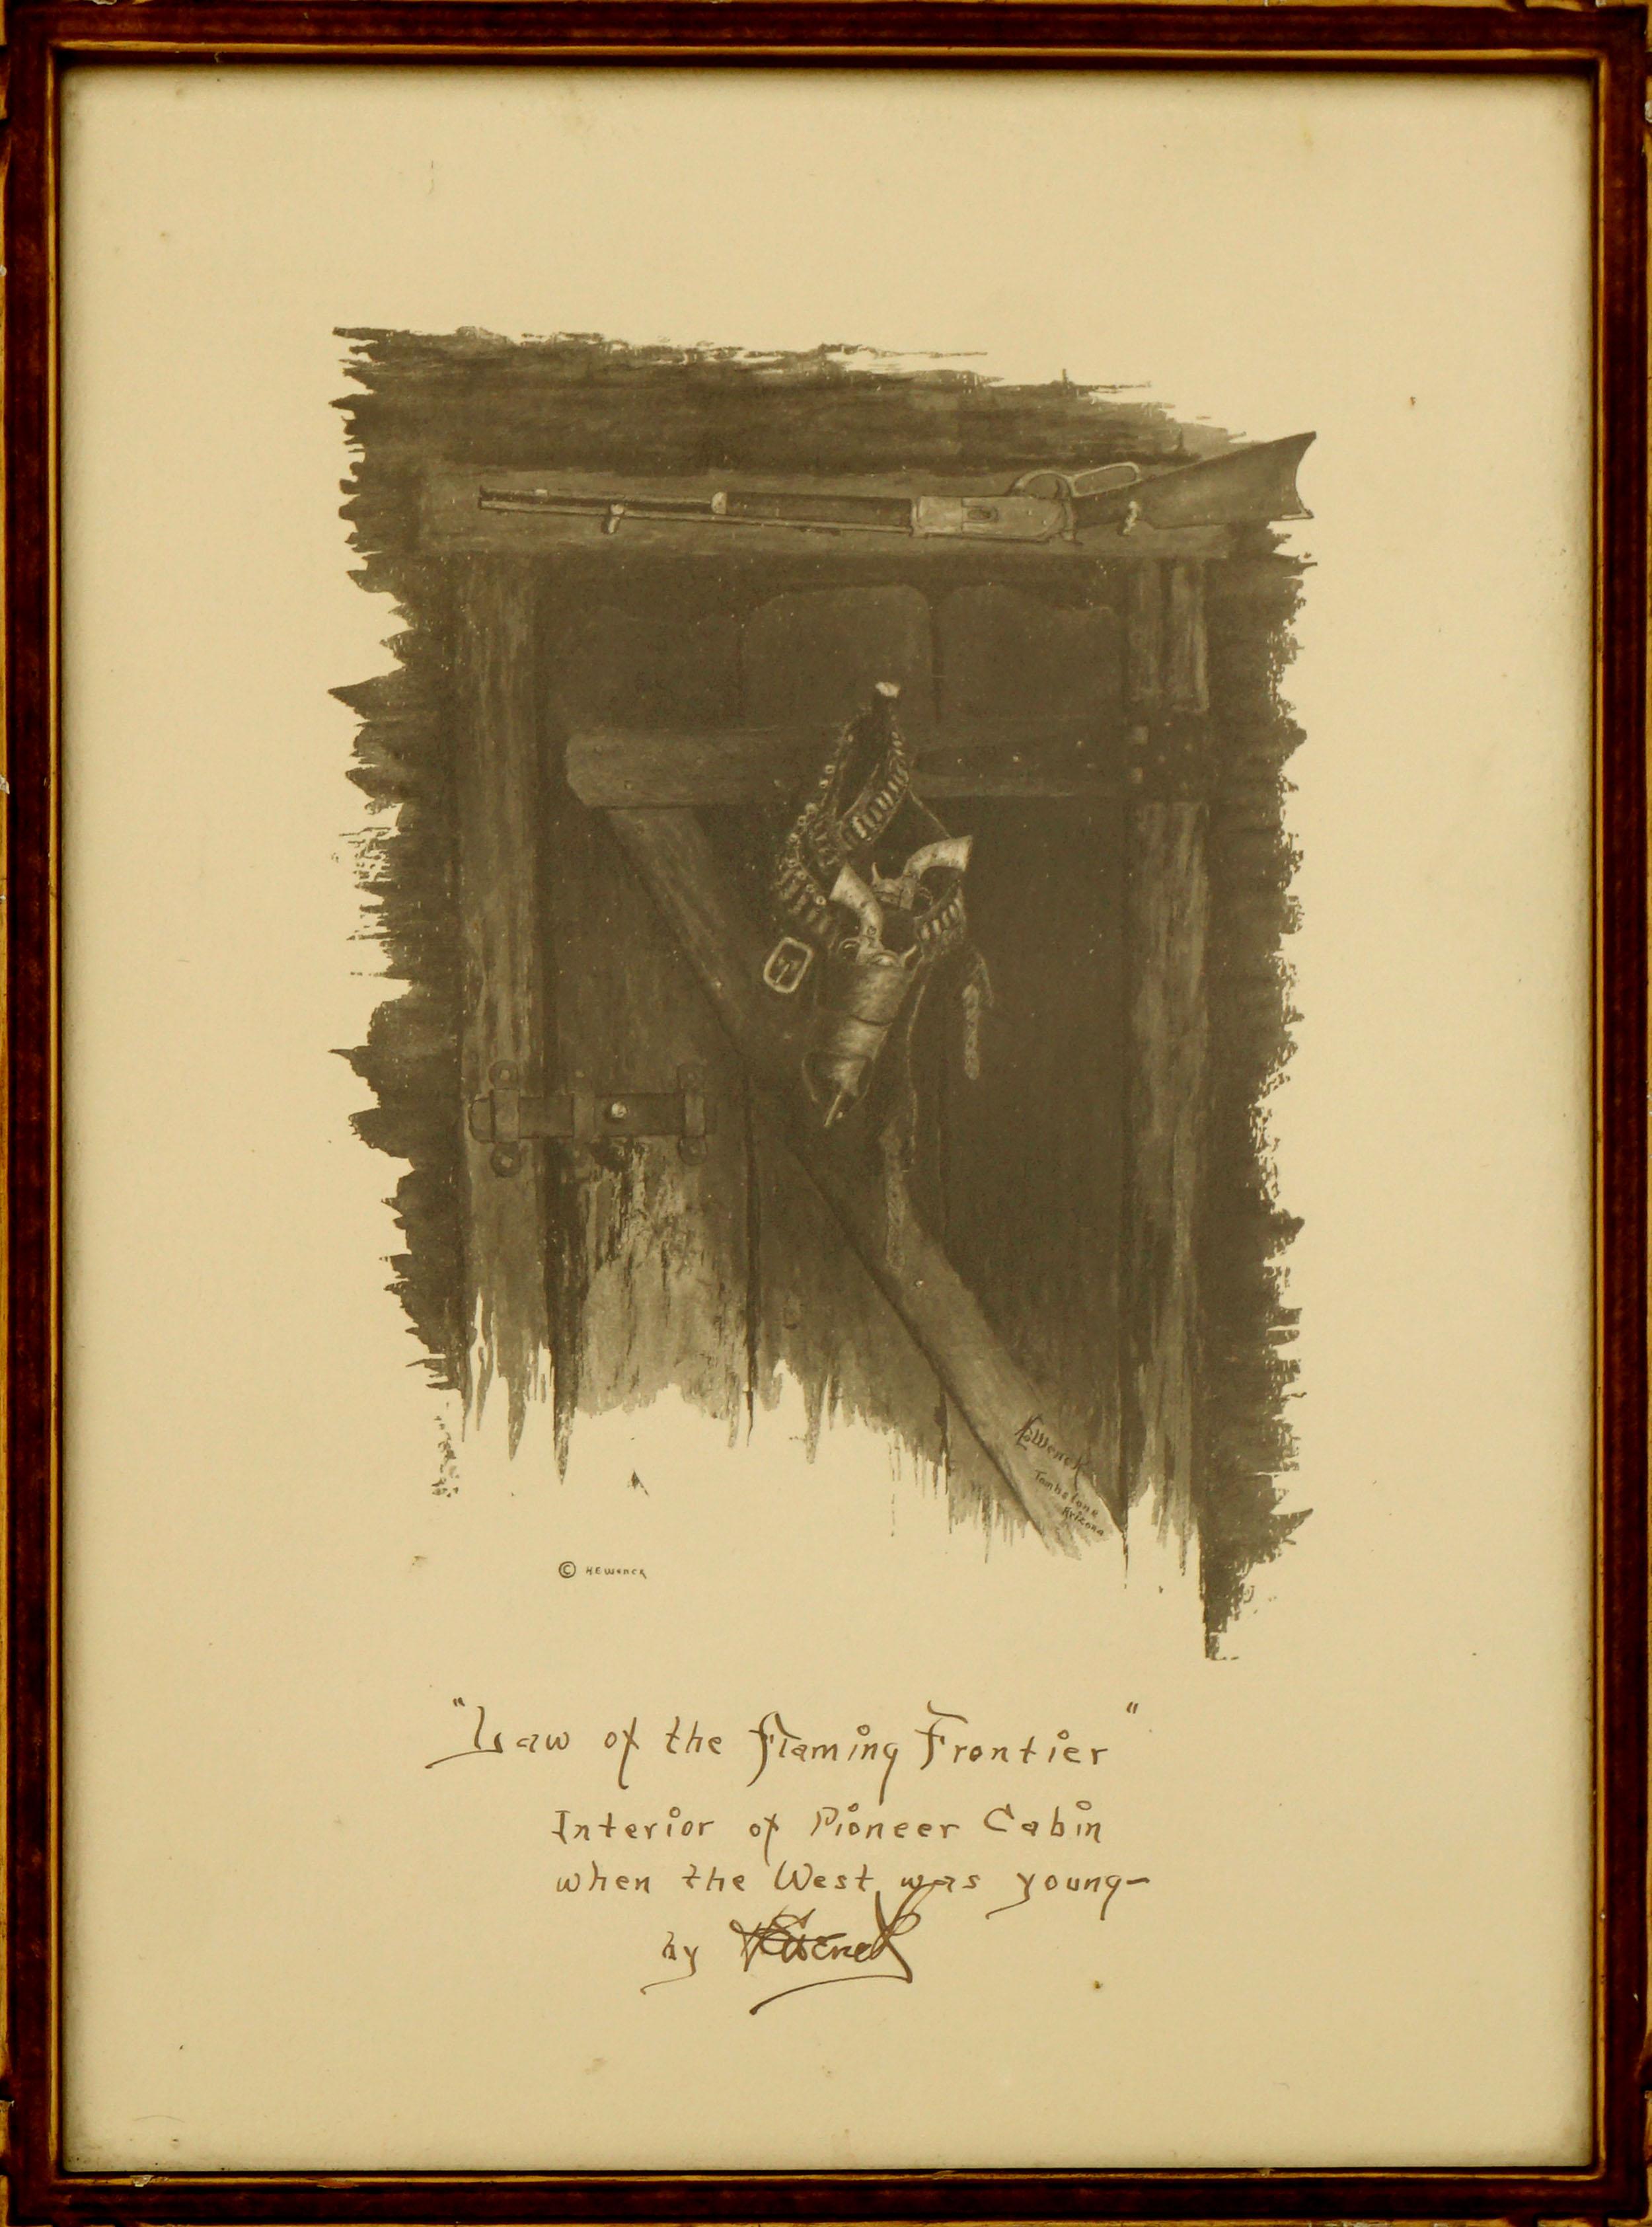 Harold Edgar Wenck Interior Print - Law of The Flaming Frontier - 1920s Western Interior with Guns and Rifle